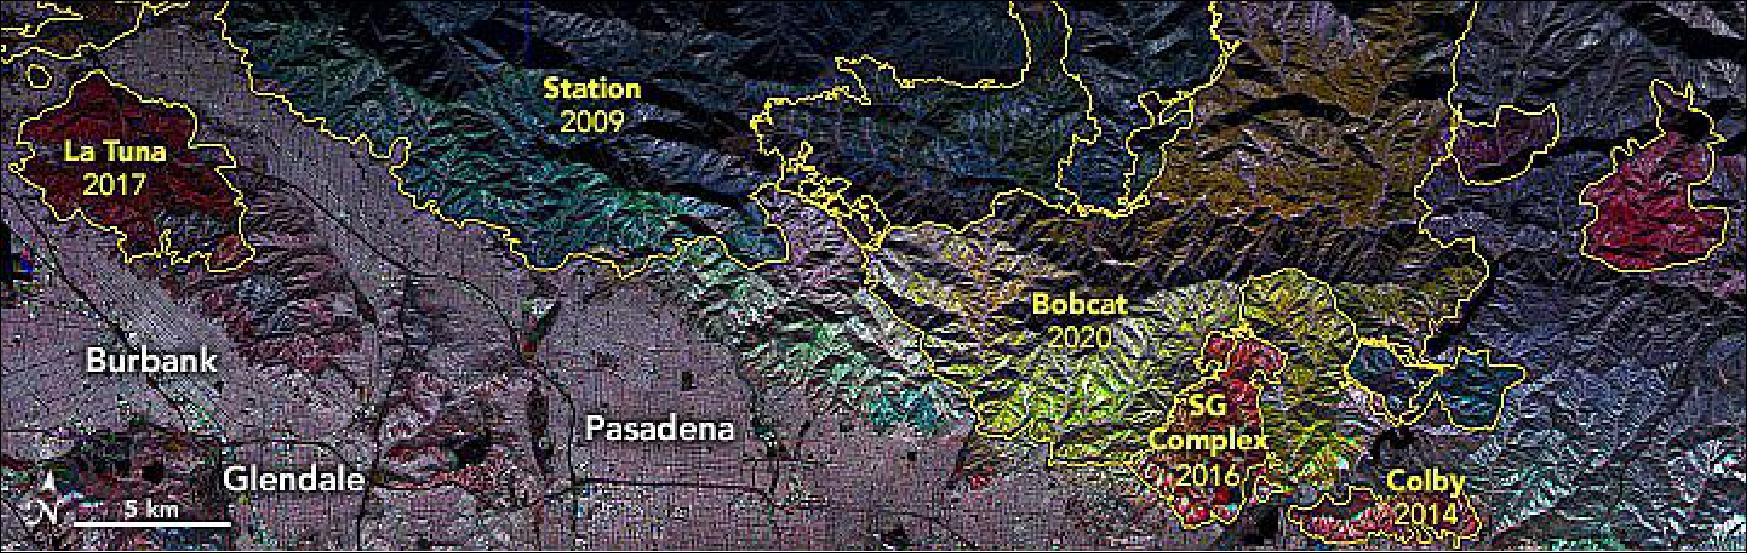 Figure 4: Scientists are using radar data to decipher where and how well landscapes recover in the years after major fires. Mounted on the bottom of NASA research planes, UAVSAR has been flown over the same portions of Southern California several times since 2009. Pinto and JPL colleagues Latha Baskaran, Yunling Lou, and David Schimel analyzed that data and developed a mapping technique to show the different stages of removal and regrowth of vegetation (chapparal and forest). [image credit: NASA Earth Observatory images by Joshua Stevens, using UAVSAR data and imagery courtesy of Anne Marie Peacock, Naiara Pinto, and Yunling Lou and NASA/Caltech UAVSAR. Story by Michael Carlowicz]